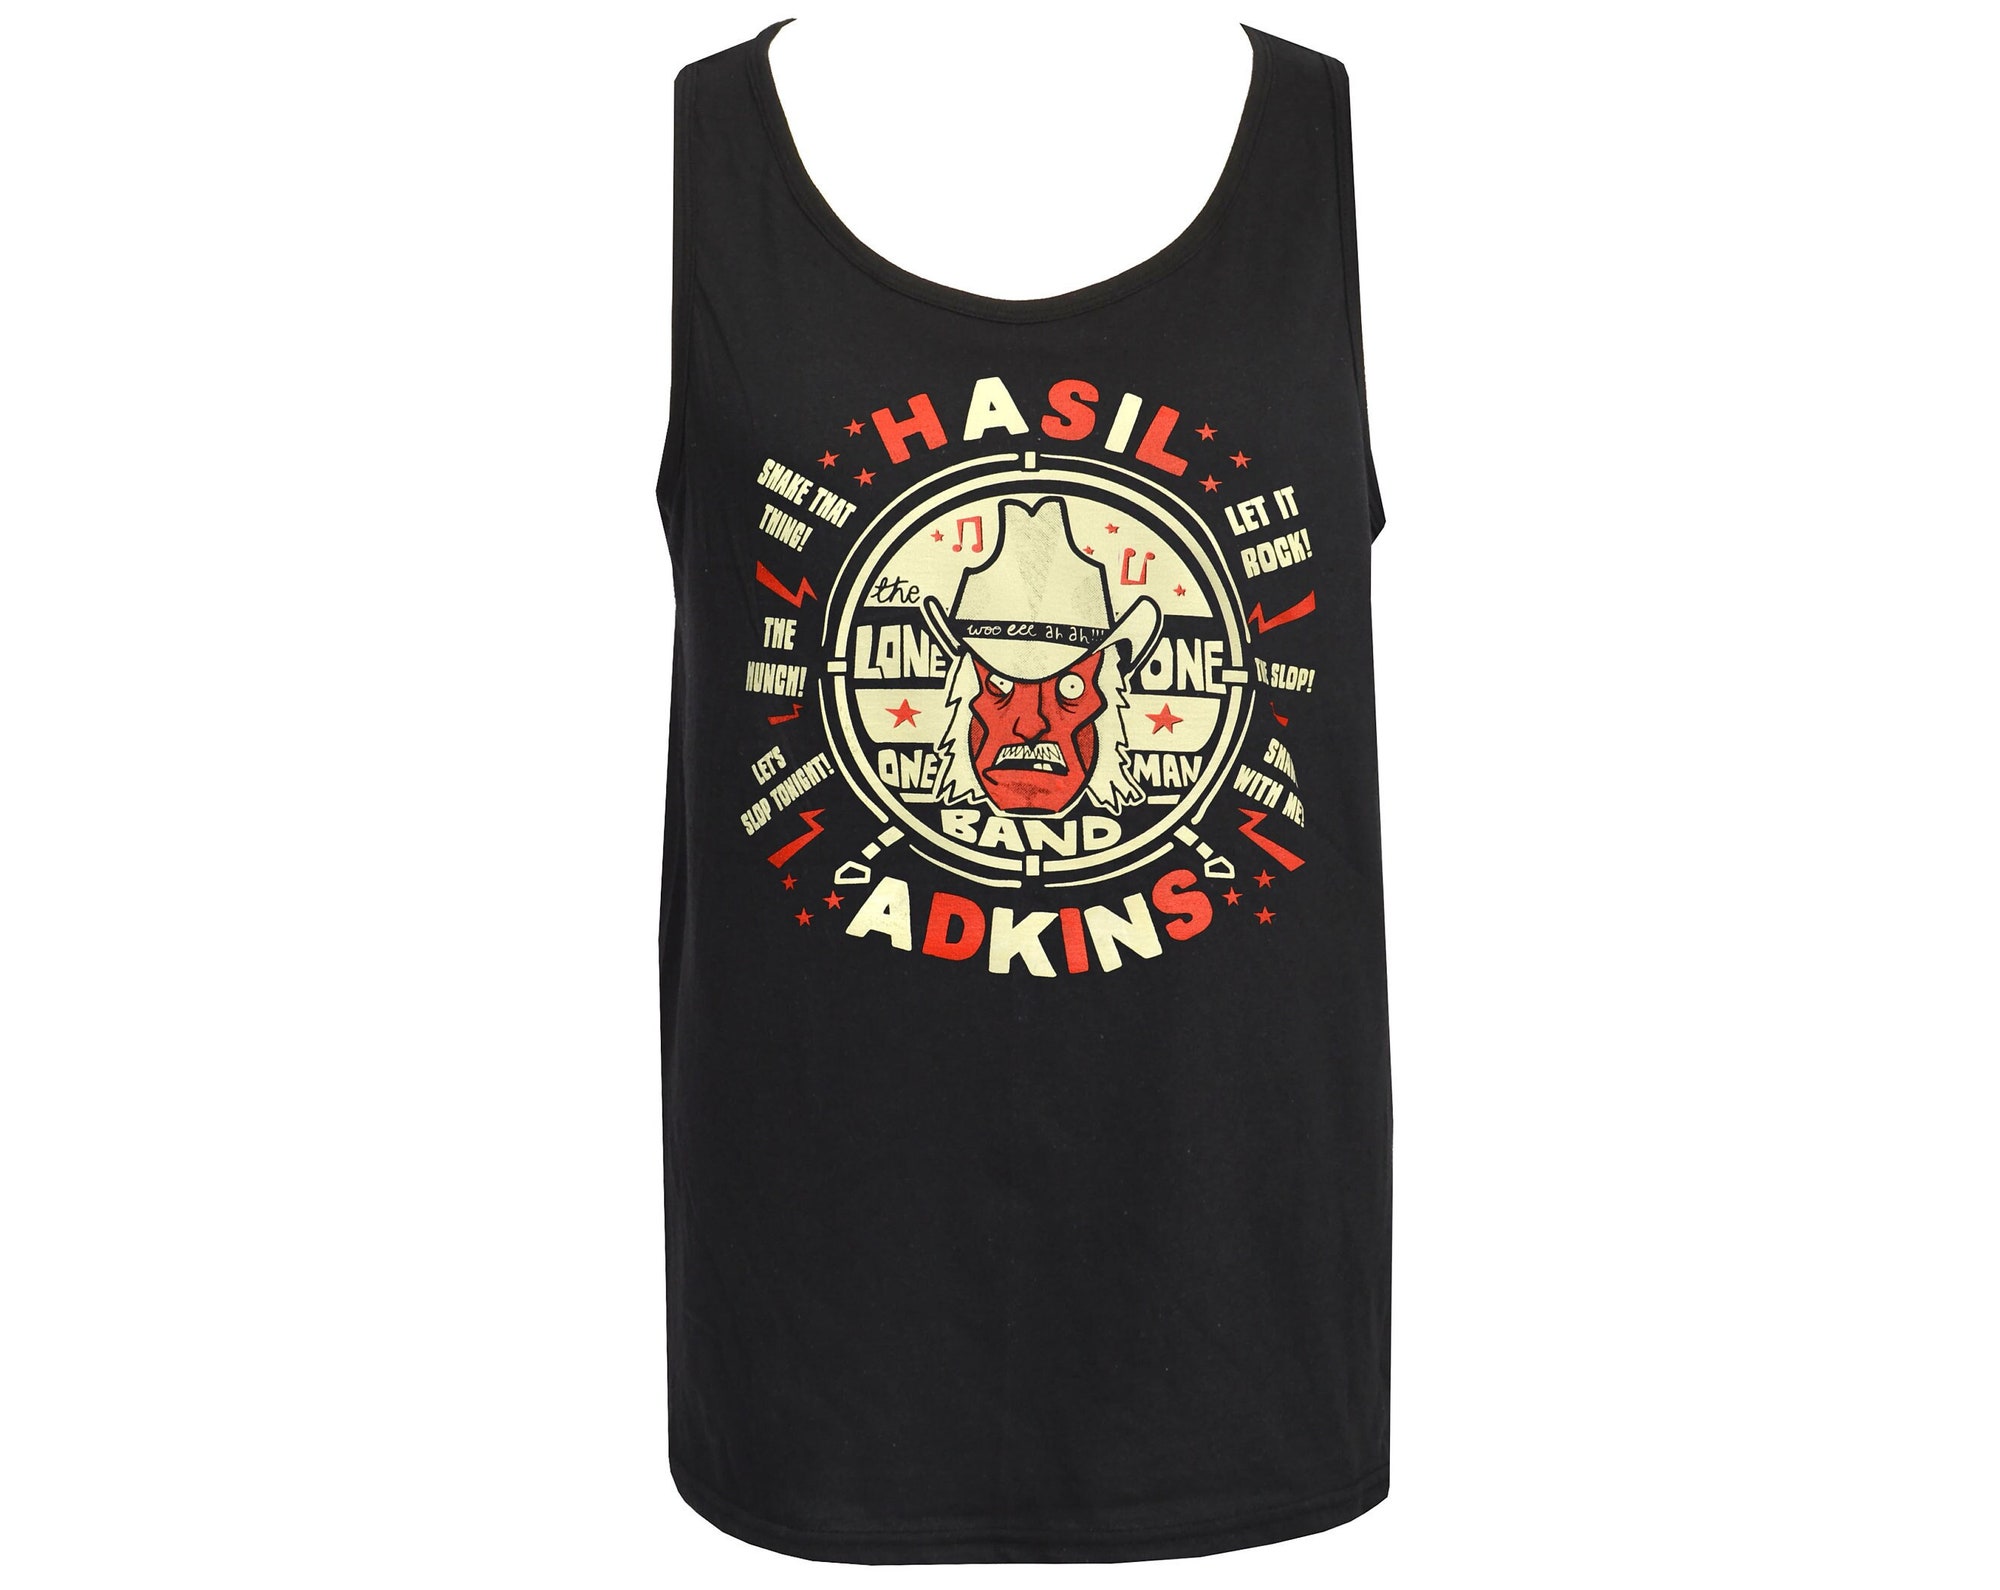 Hasil Adkins Mens Tank Top Rock & Roll Country Blues One Man Band